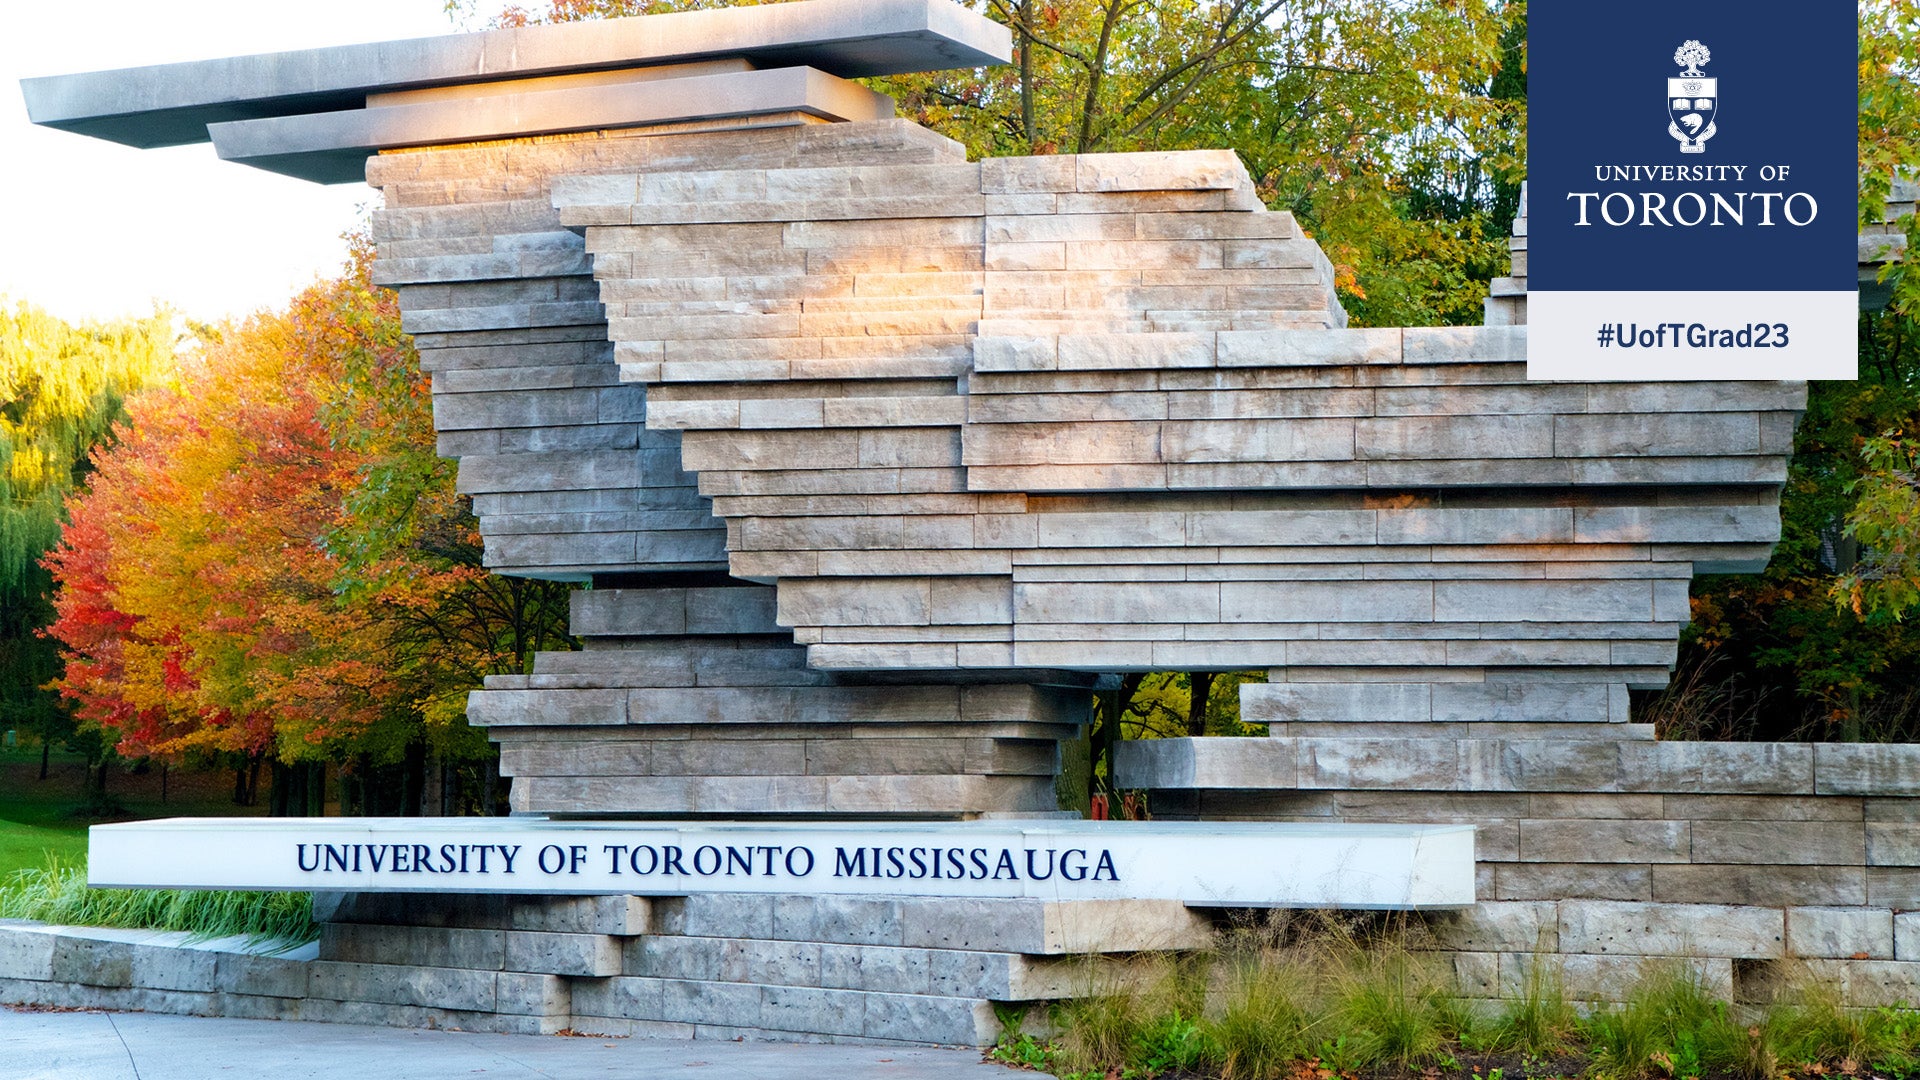 U of T Mississauga sign and rock structure, surrounded by fall foliage